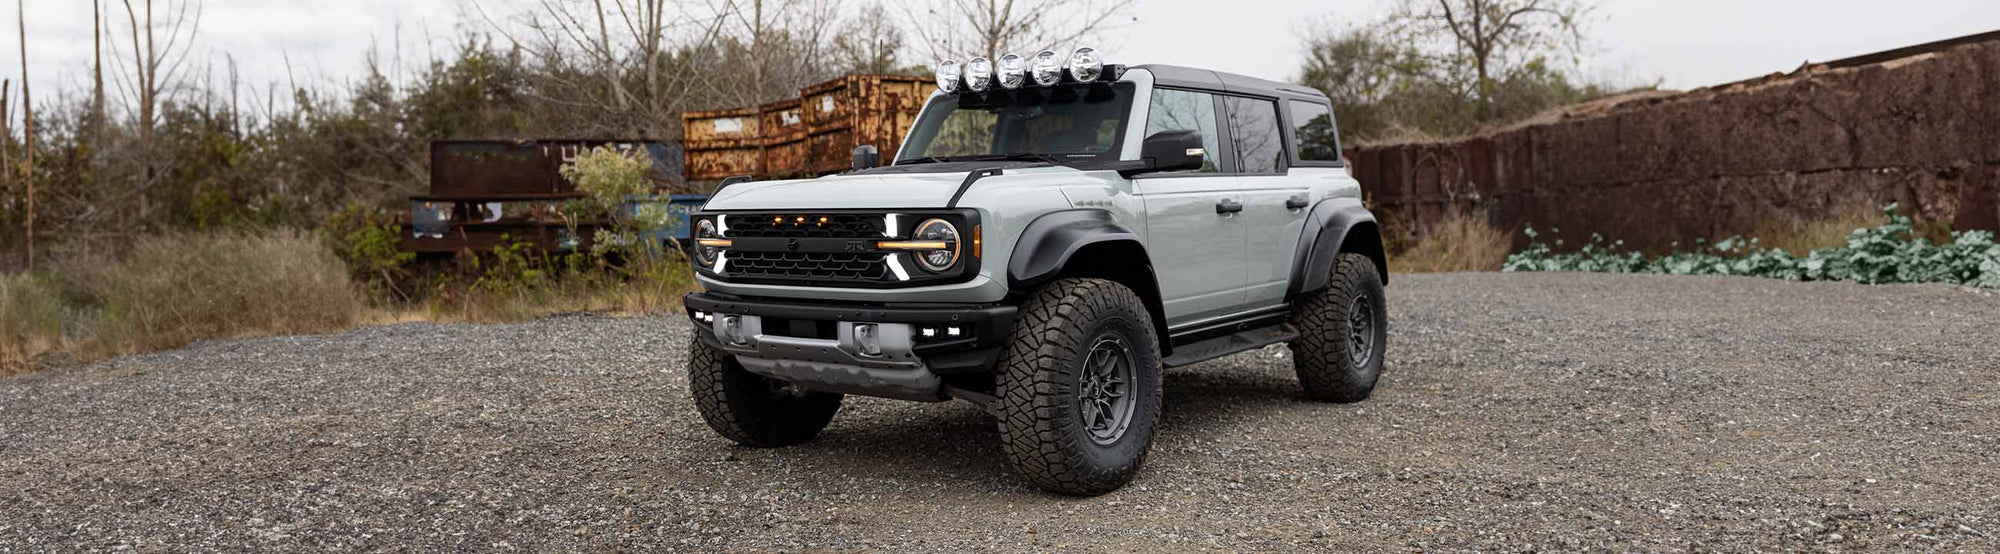 Bronco Raptor with RTR parts on Offroad trail